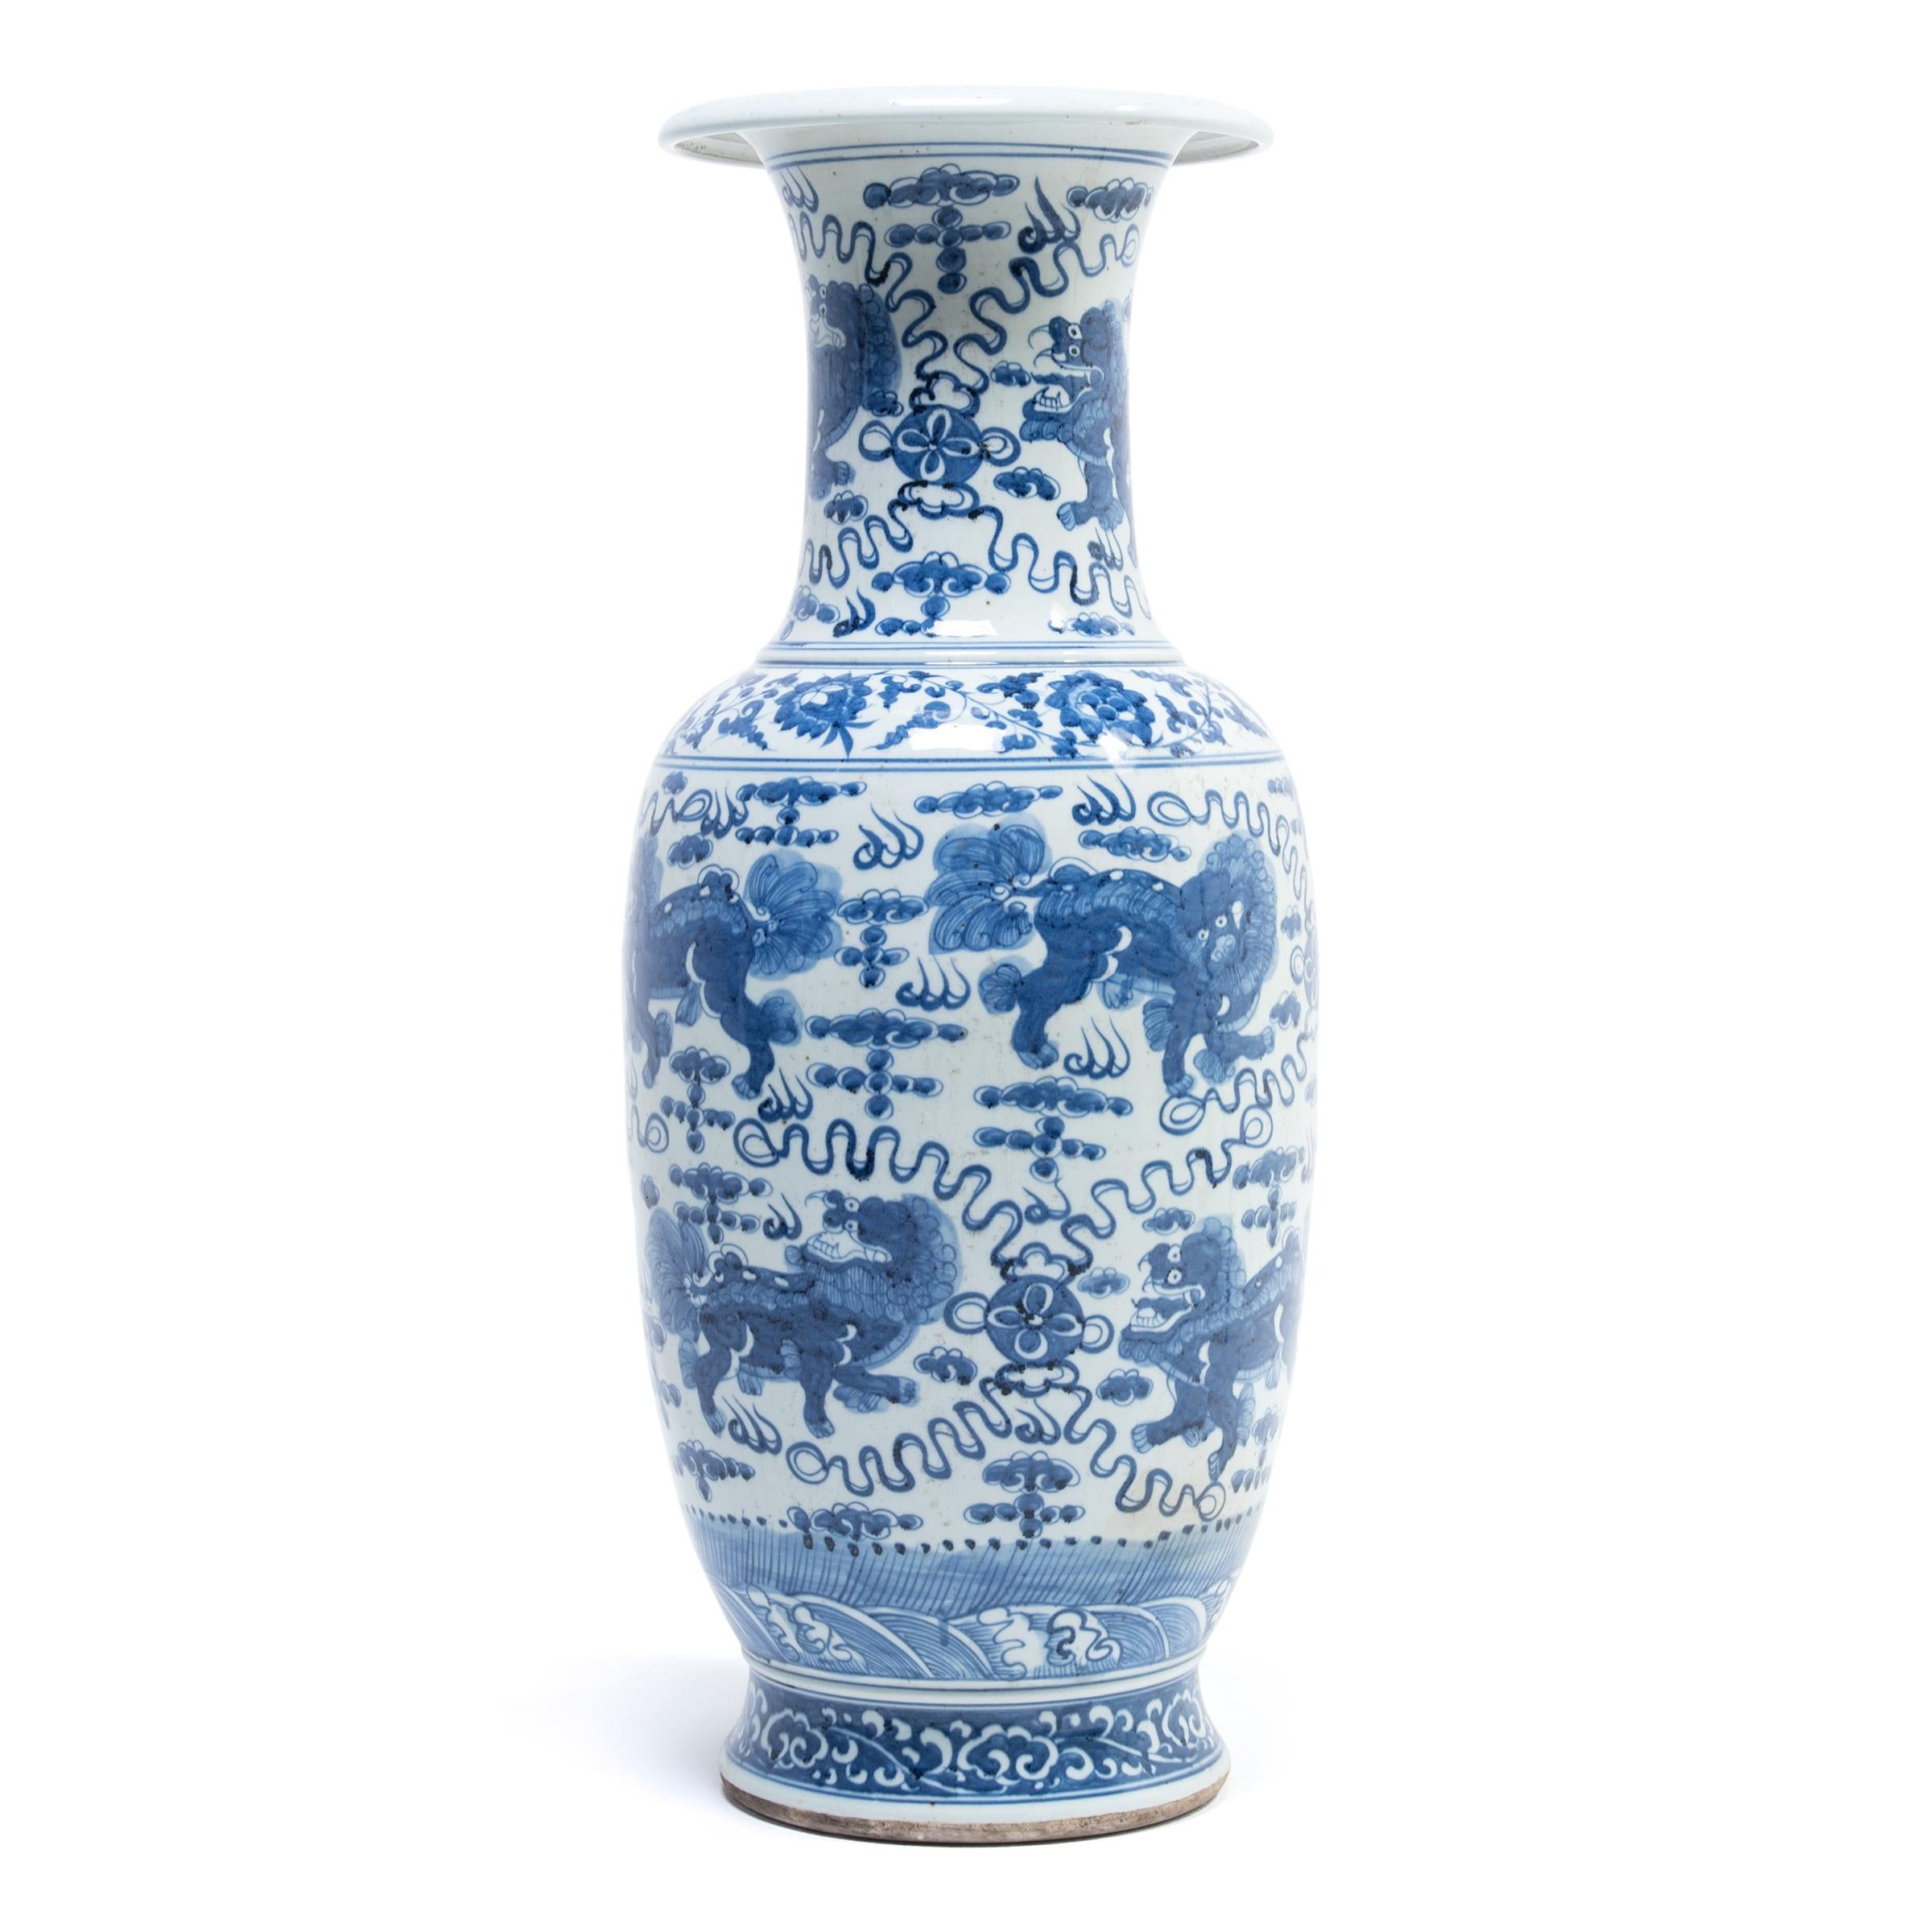 A parade of Qilin, Chinese mythical creatures symbolizing magnificence, joy and benevolence, march around this hand painted porcelain fantail vase. It is a wonderful example of contemporary Chinese blue and white porcelain that has been sought by